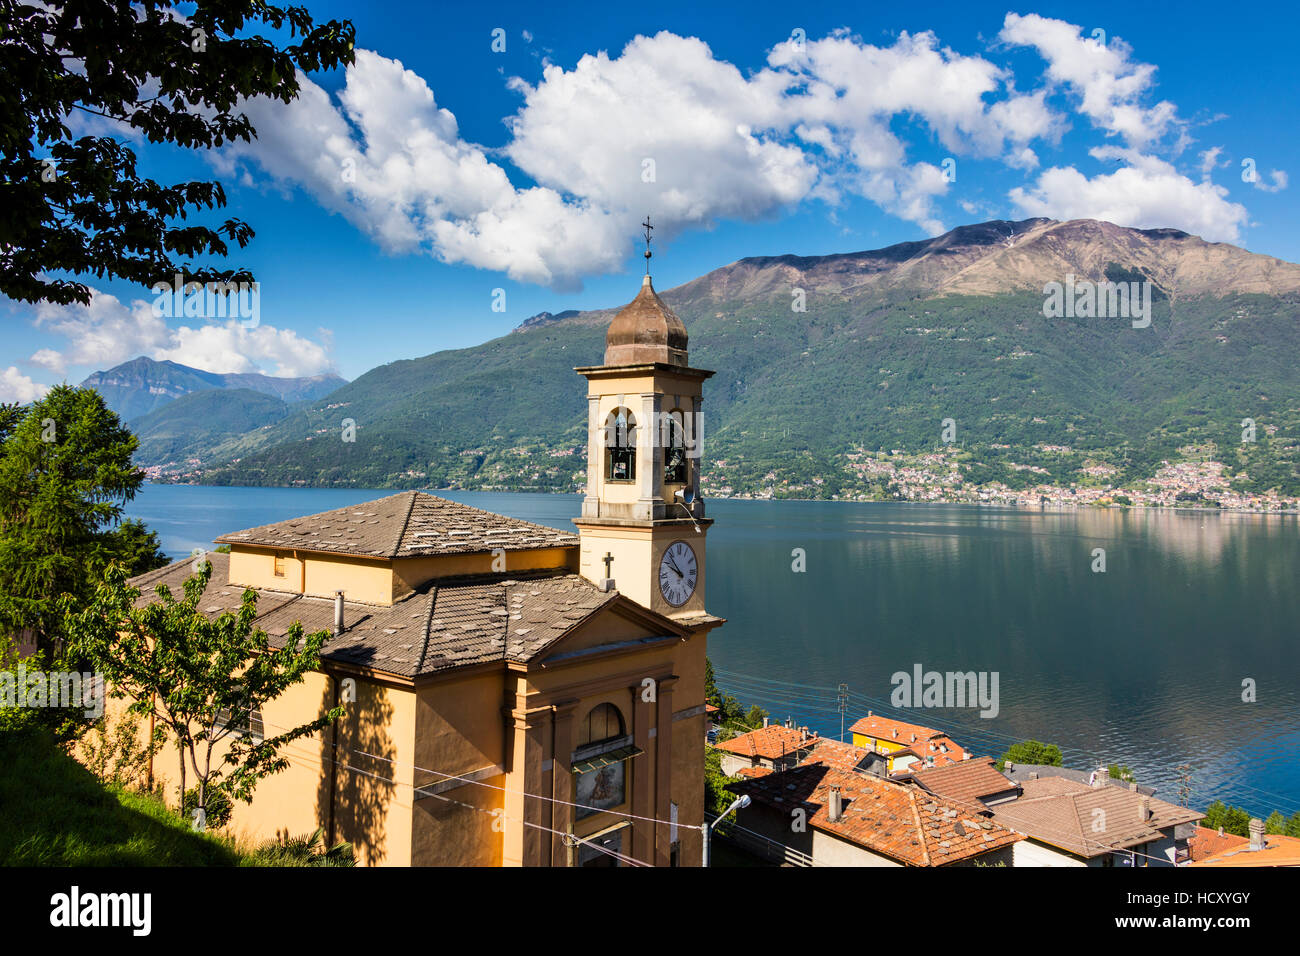 View of the bell tower and village of Dorio, Lake Como, Province of Lecco, Italian Lakes, Lombardy, Italy Stock Photo